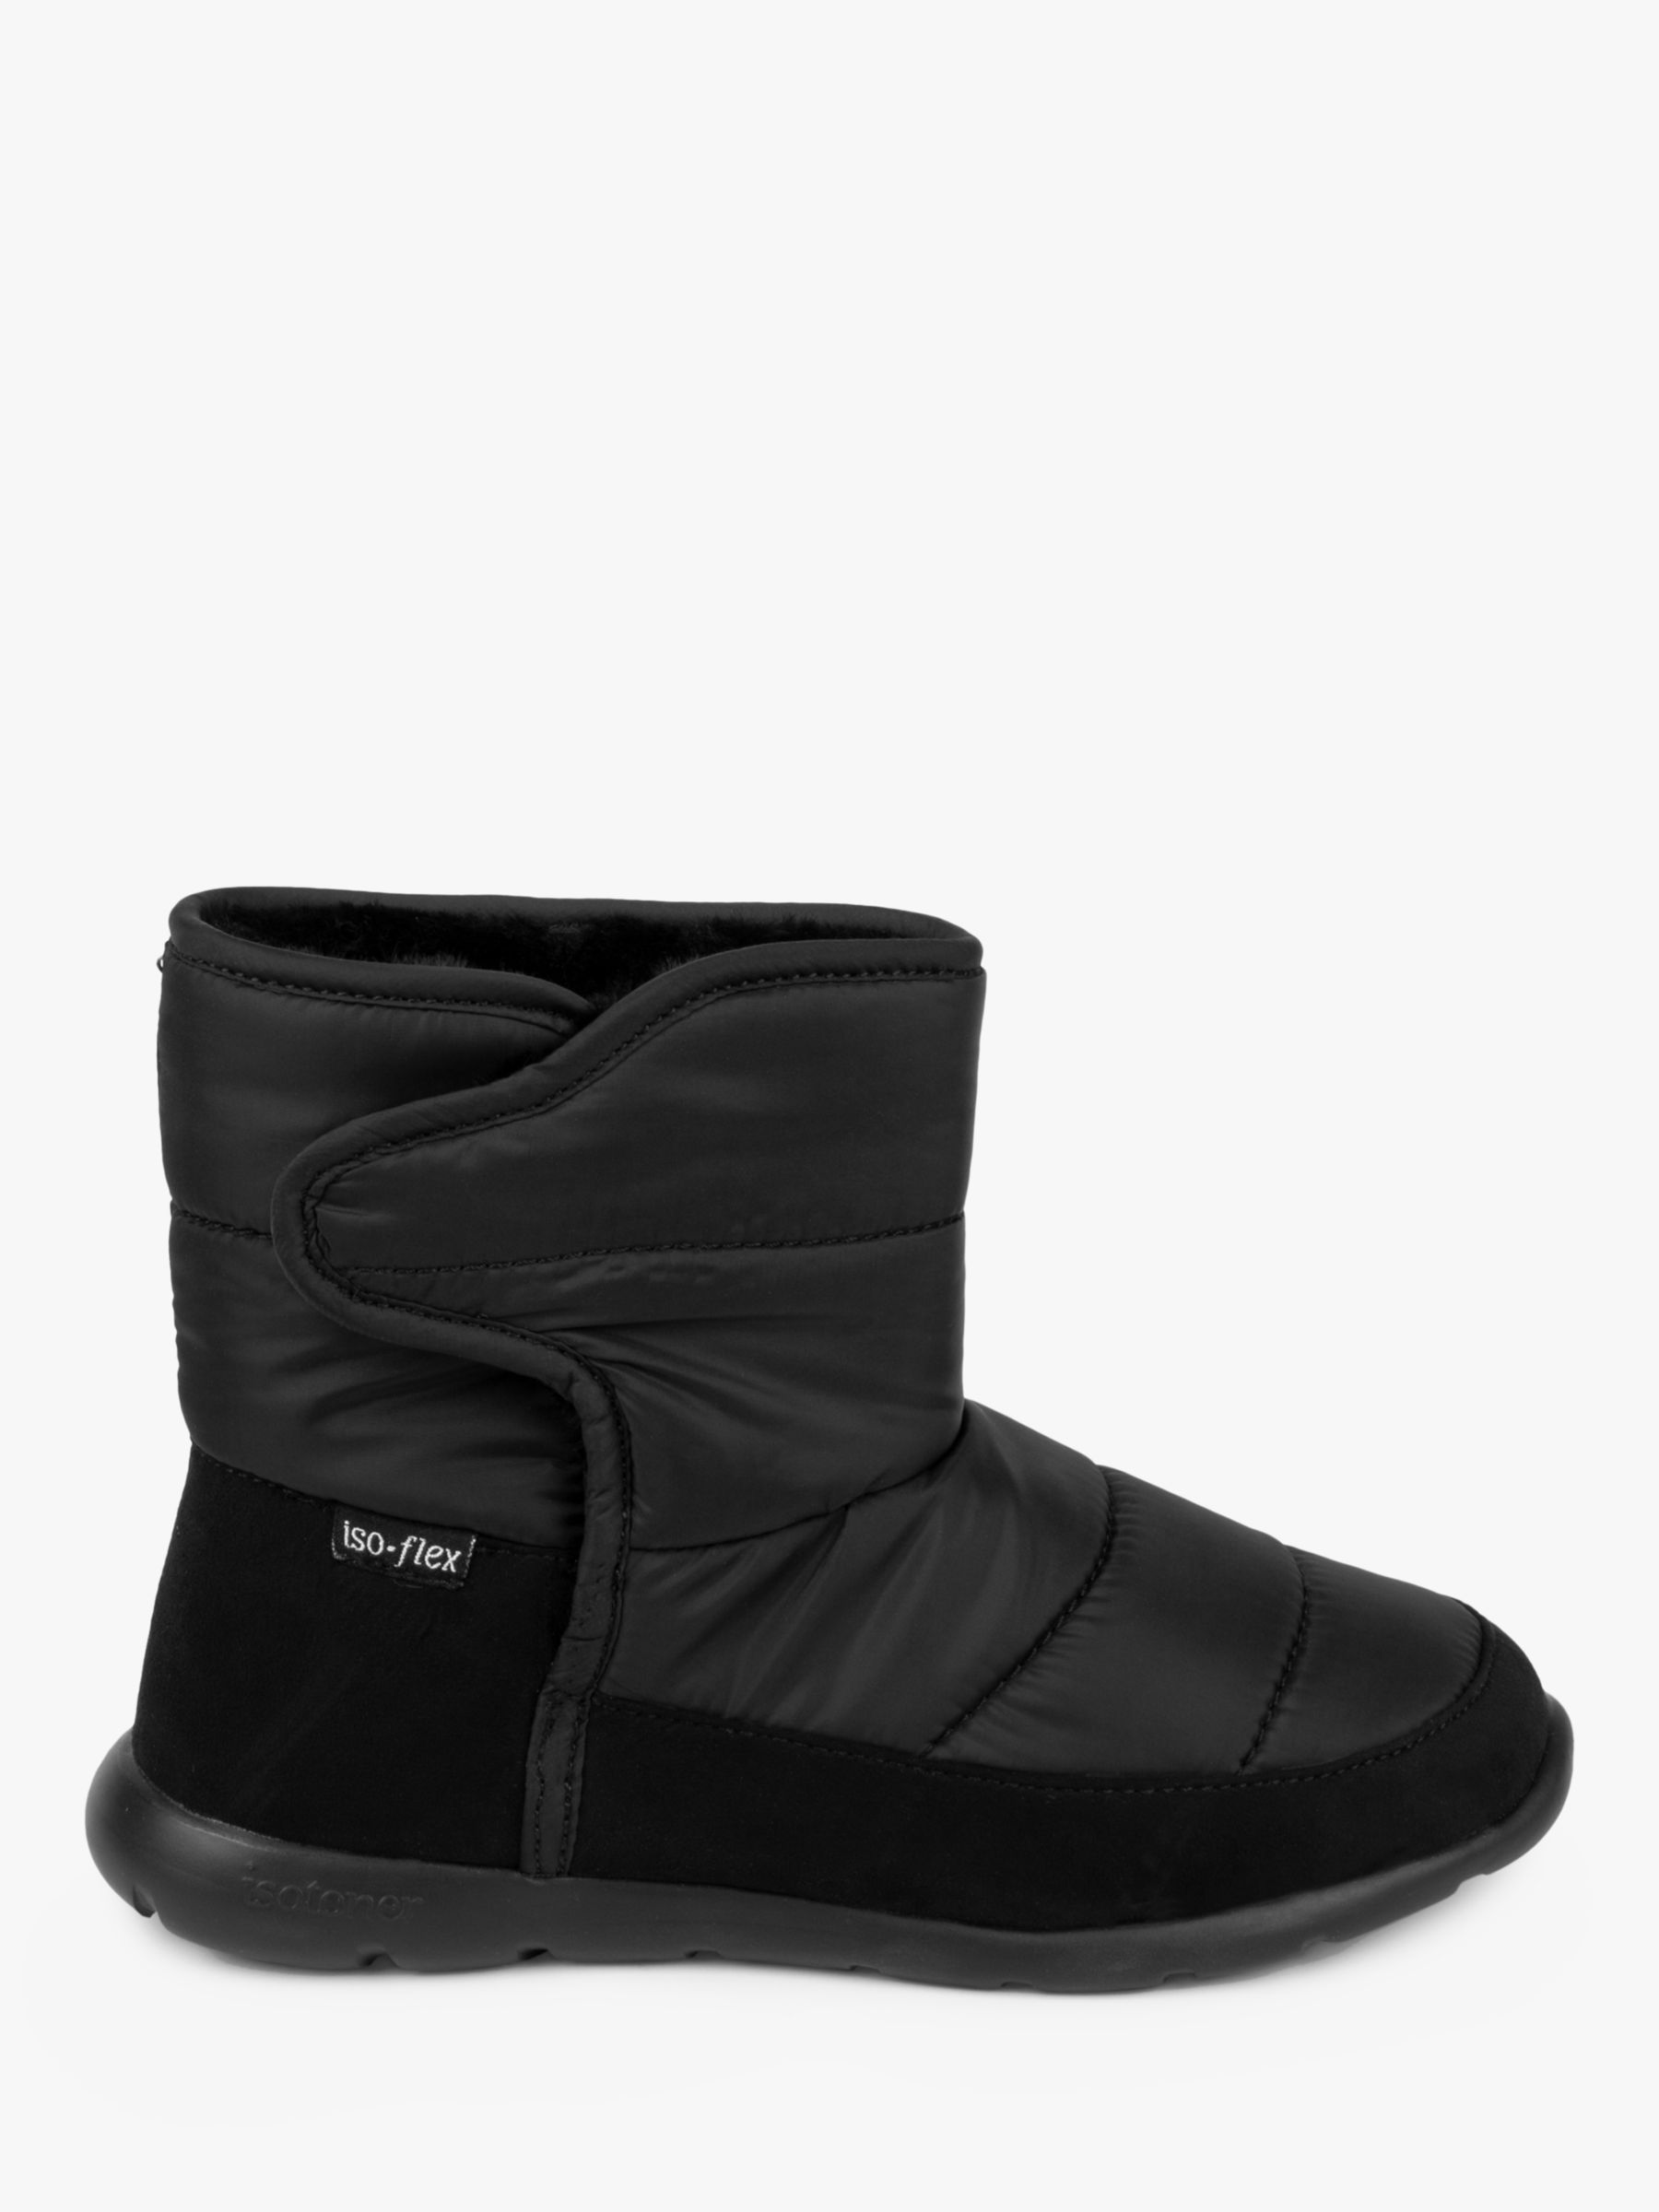 totes Iso Flex Quilted Slipper Boots, Black at John Lewis & Partners